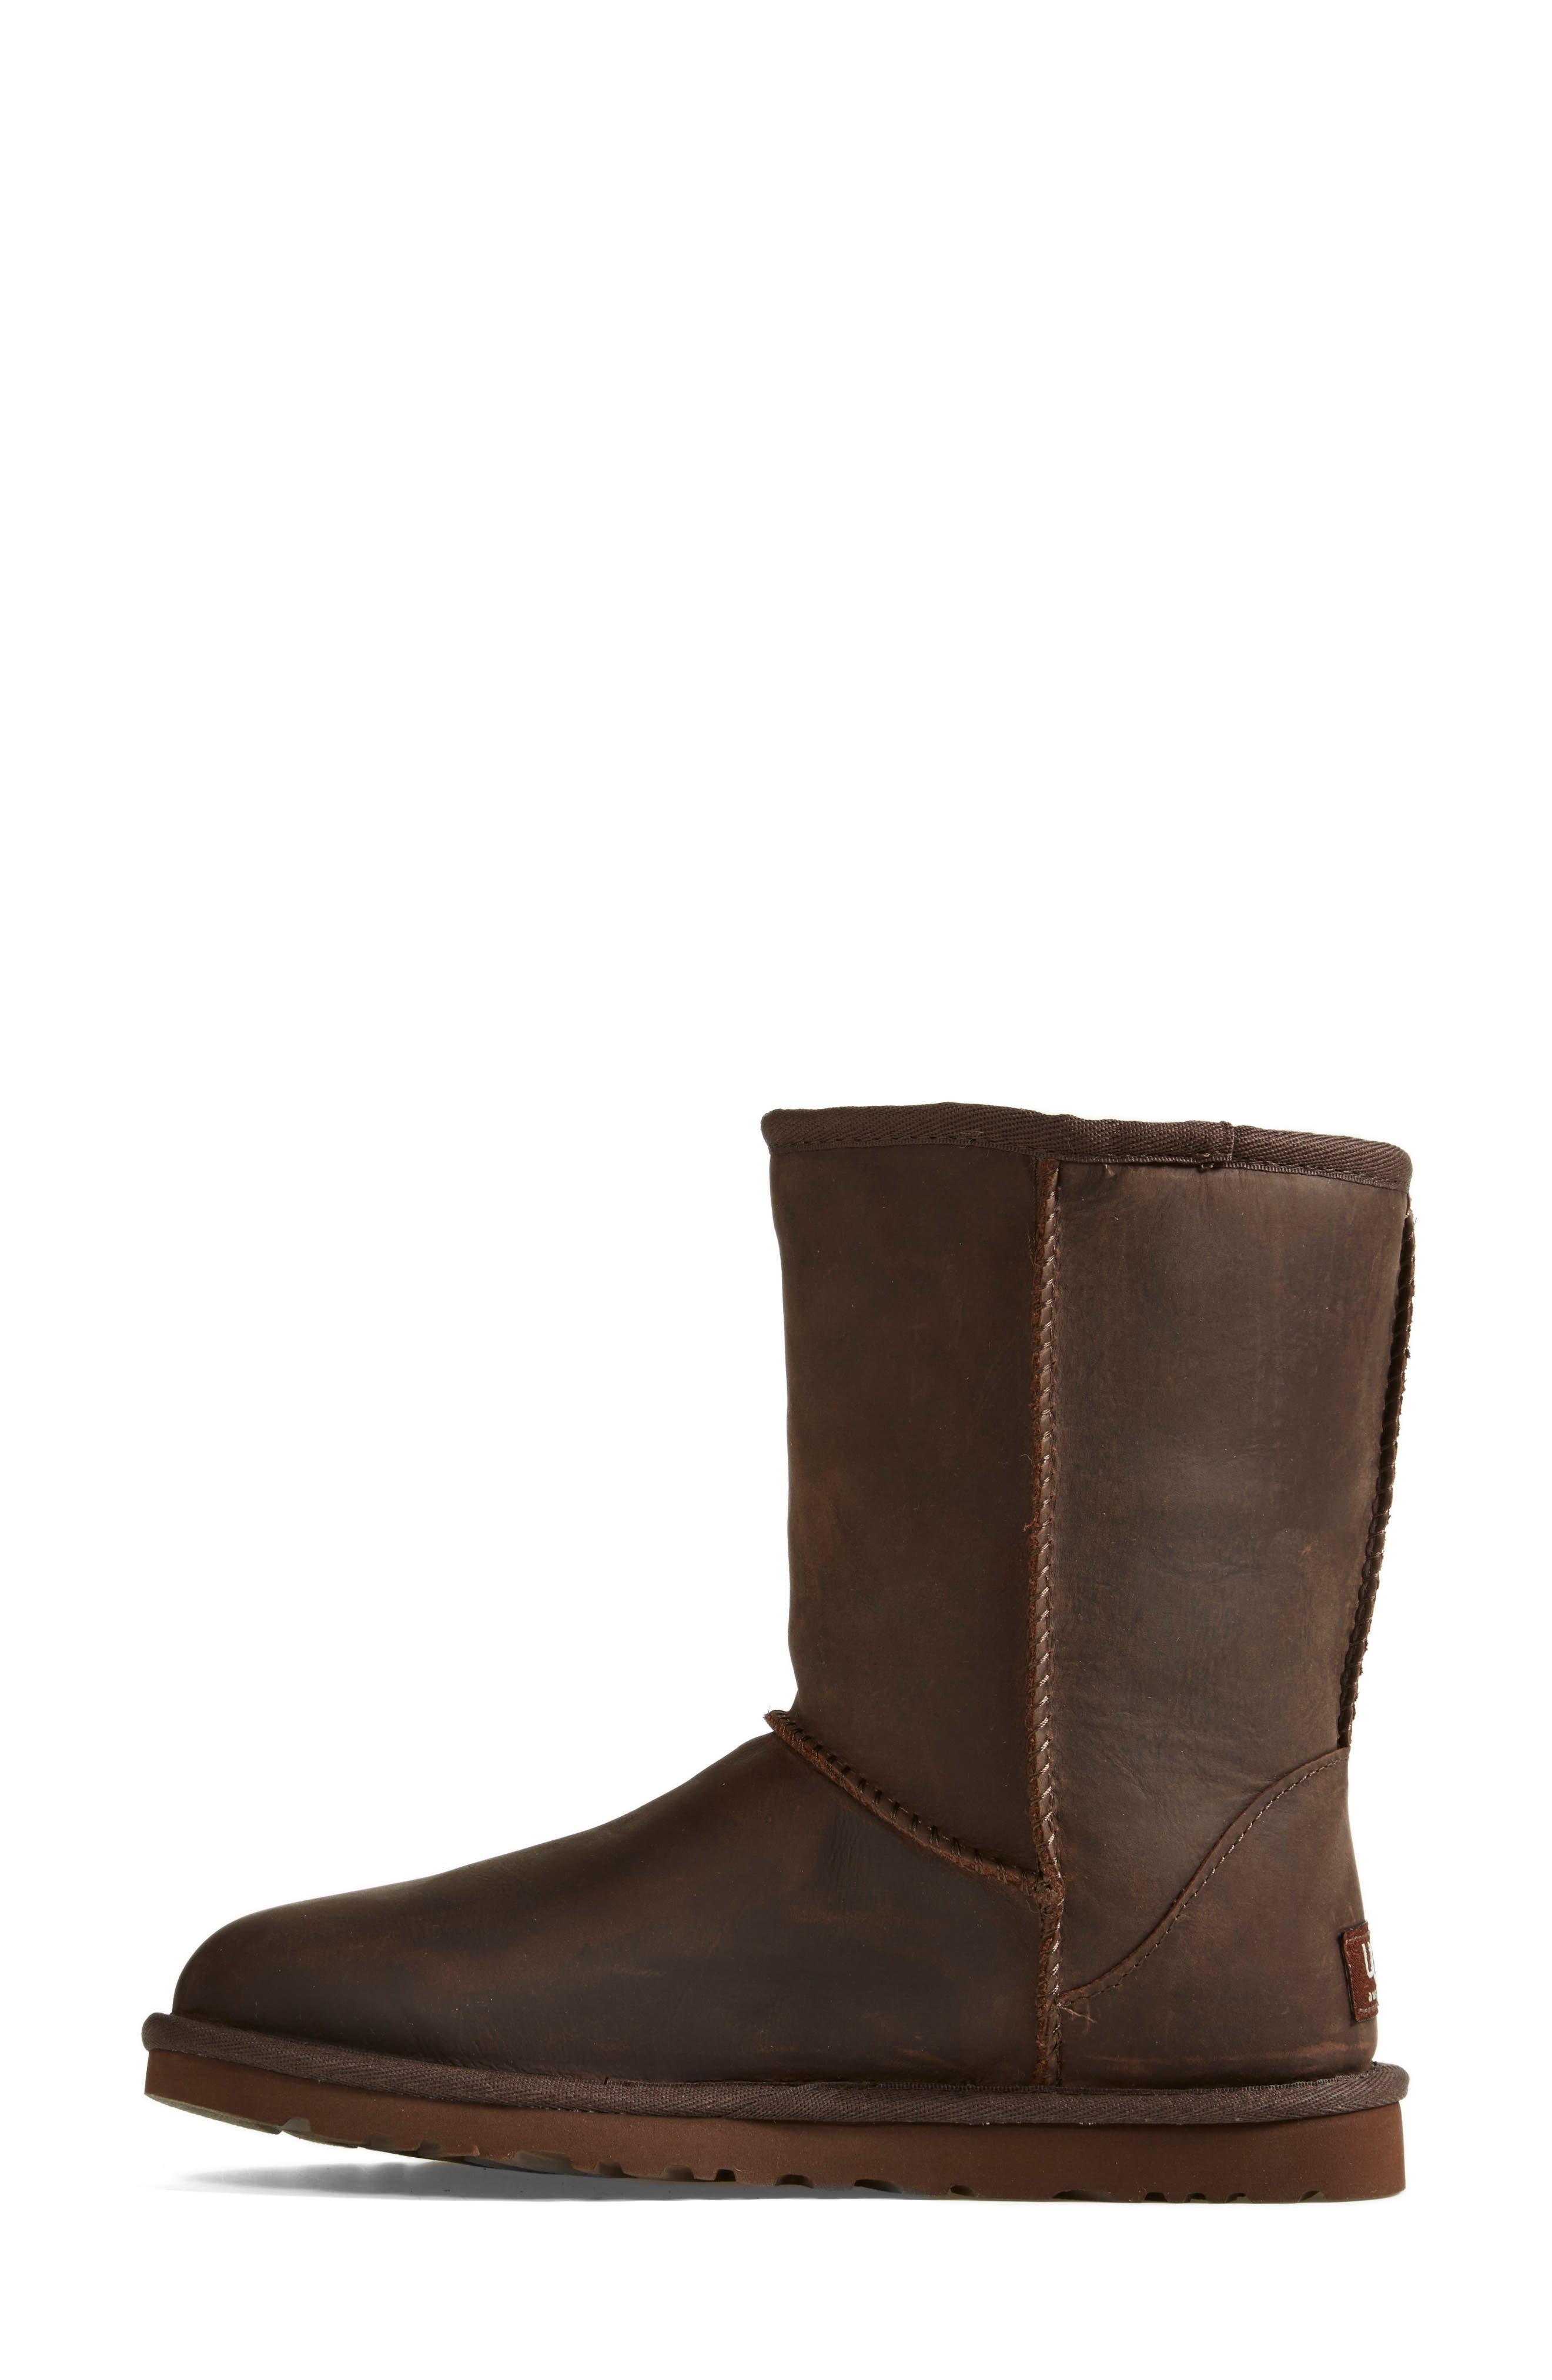 brown leather ugg boots